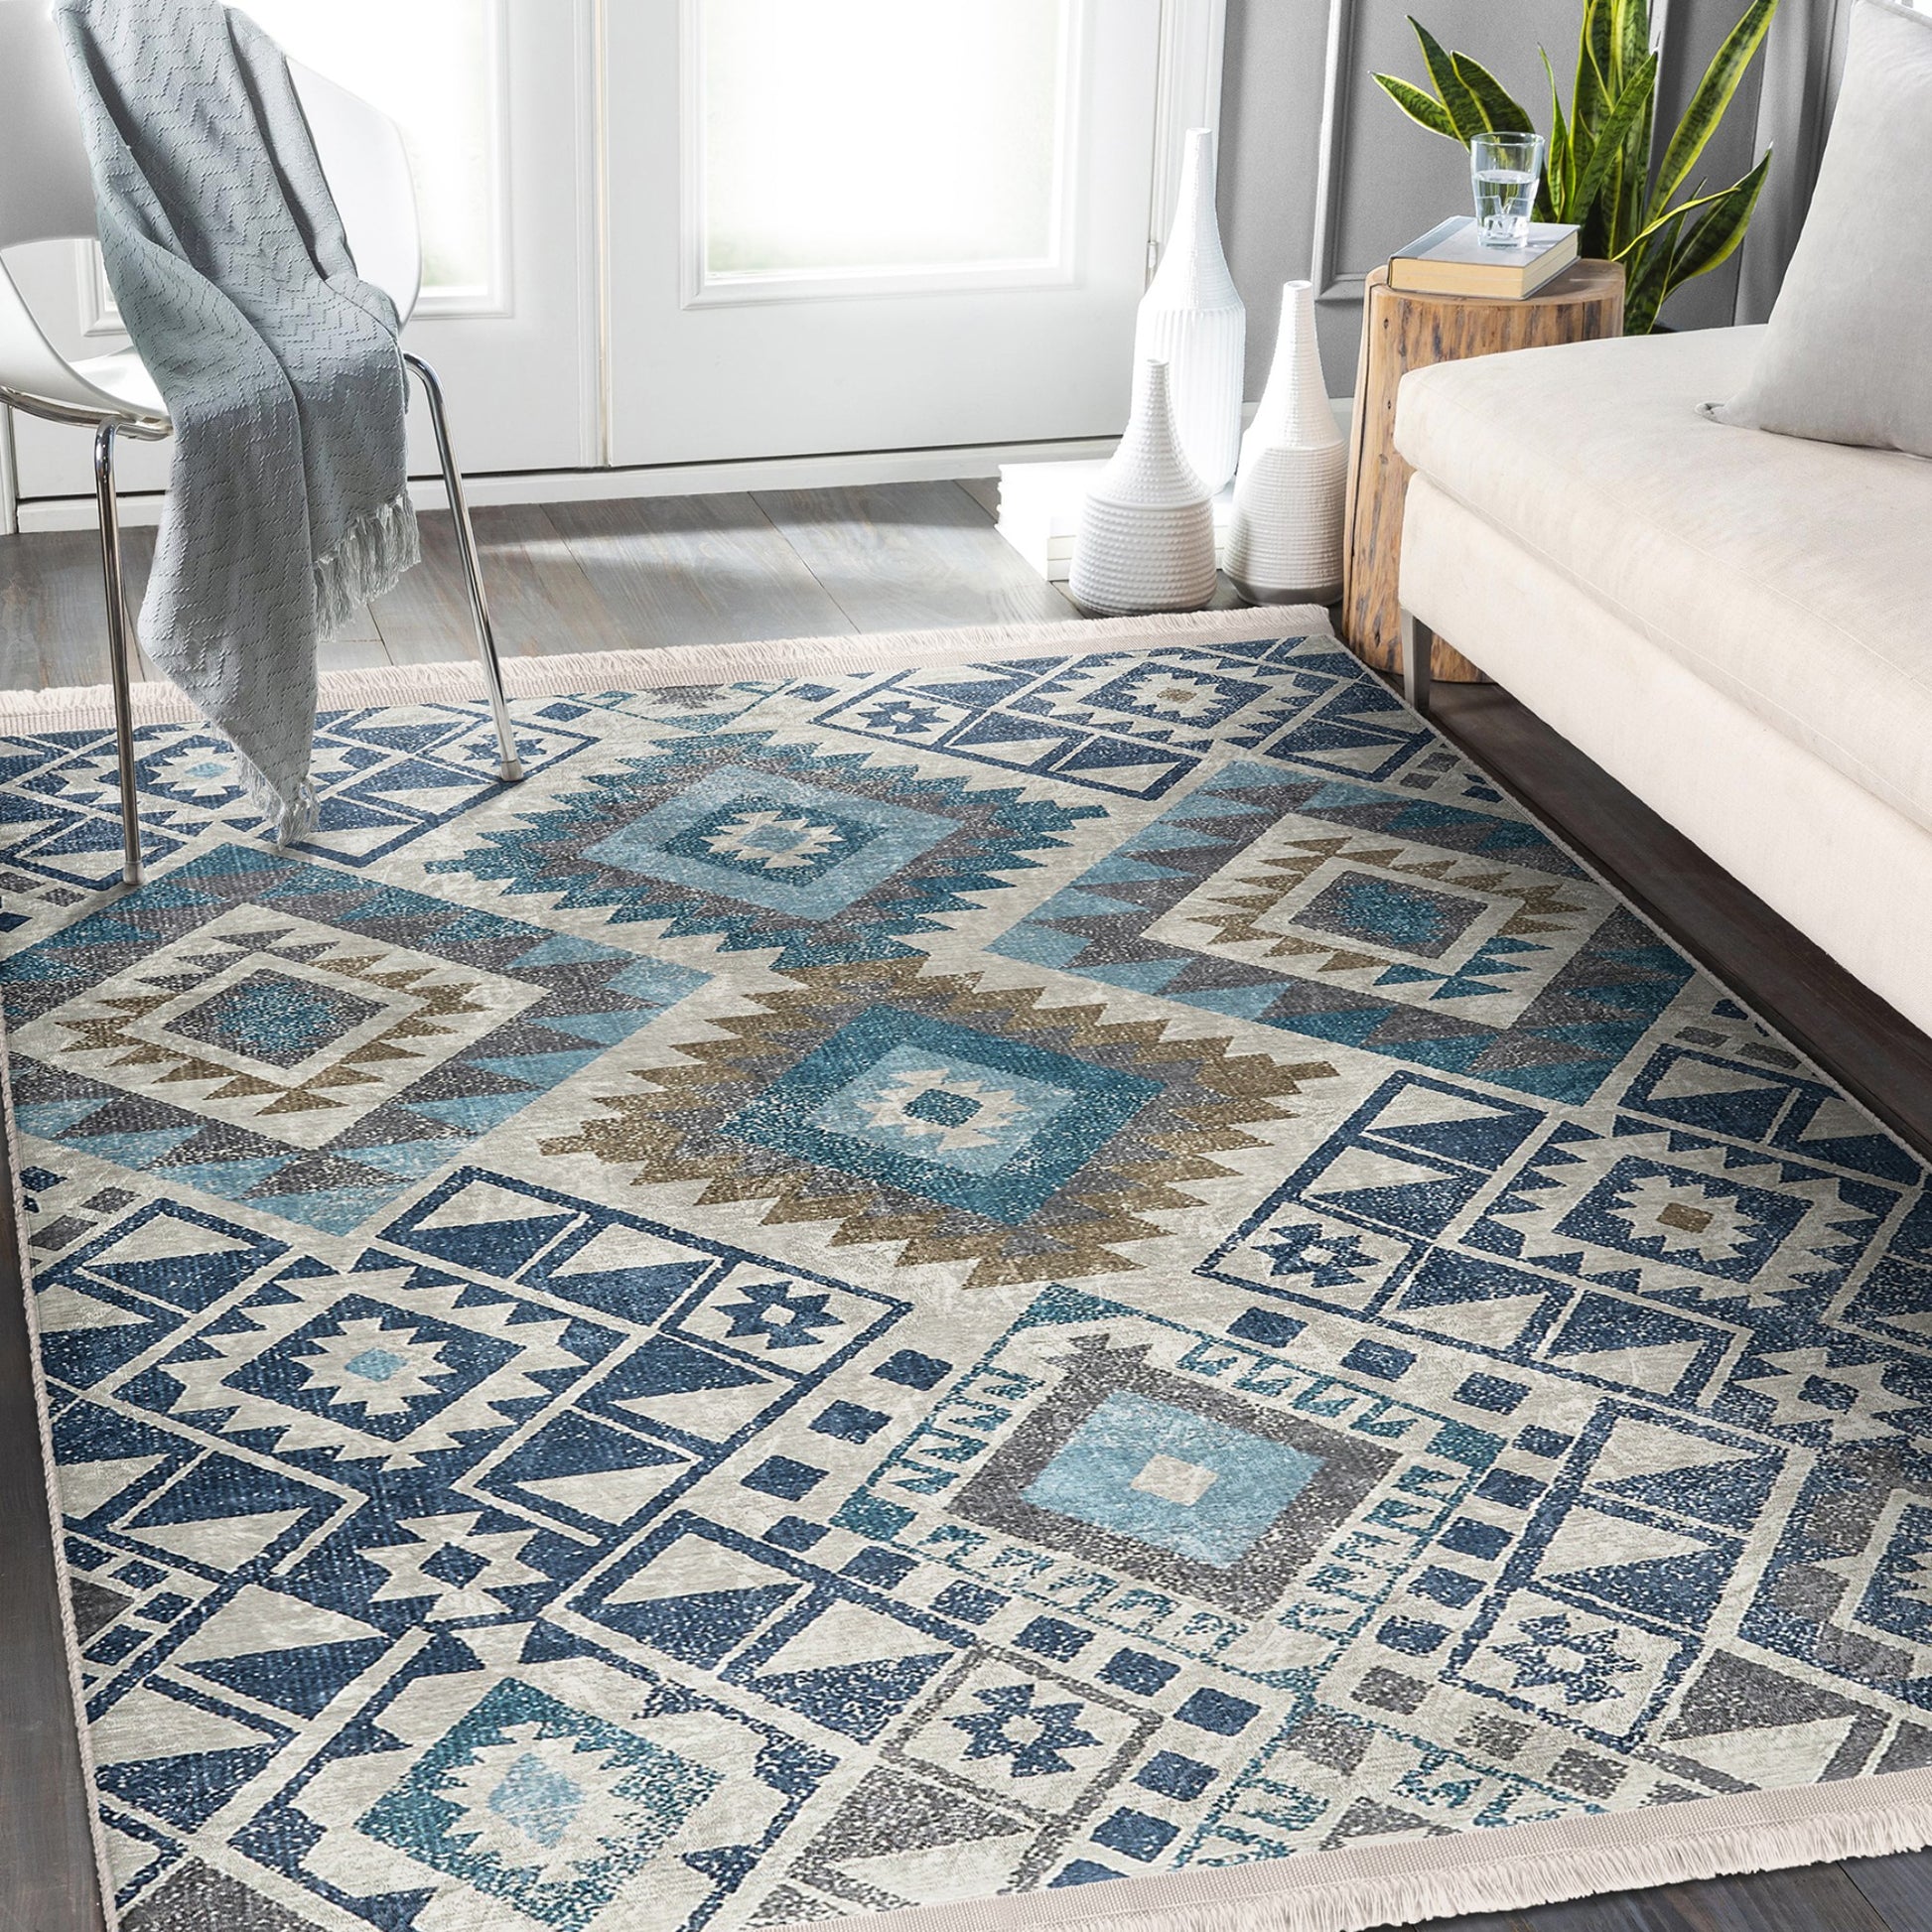 Functional and Stylish Area Rug with Aztec-Inspired Design